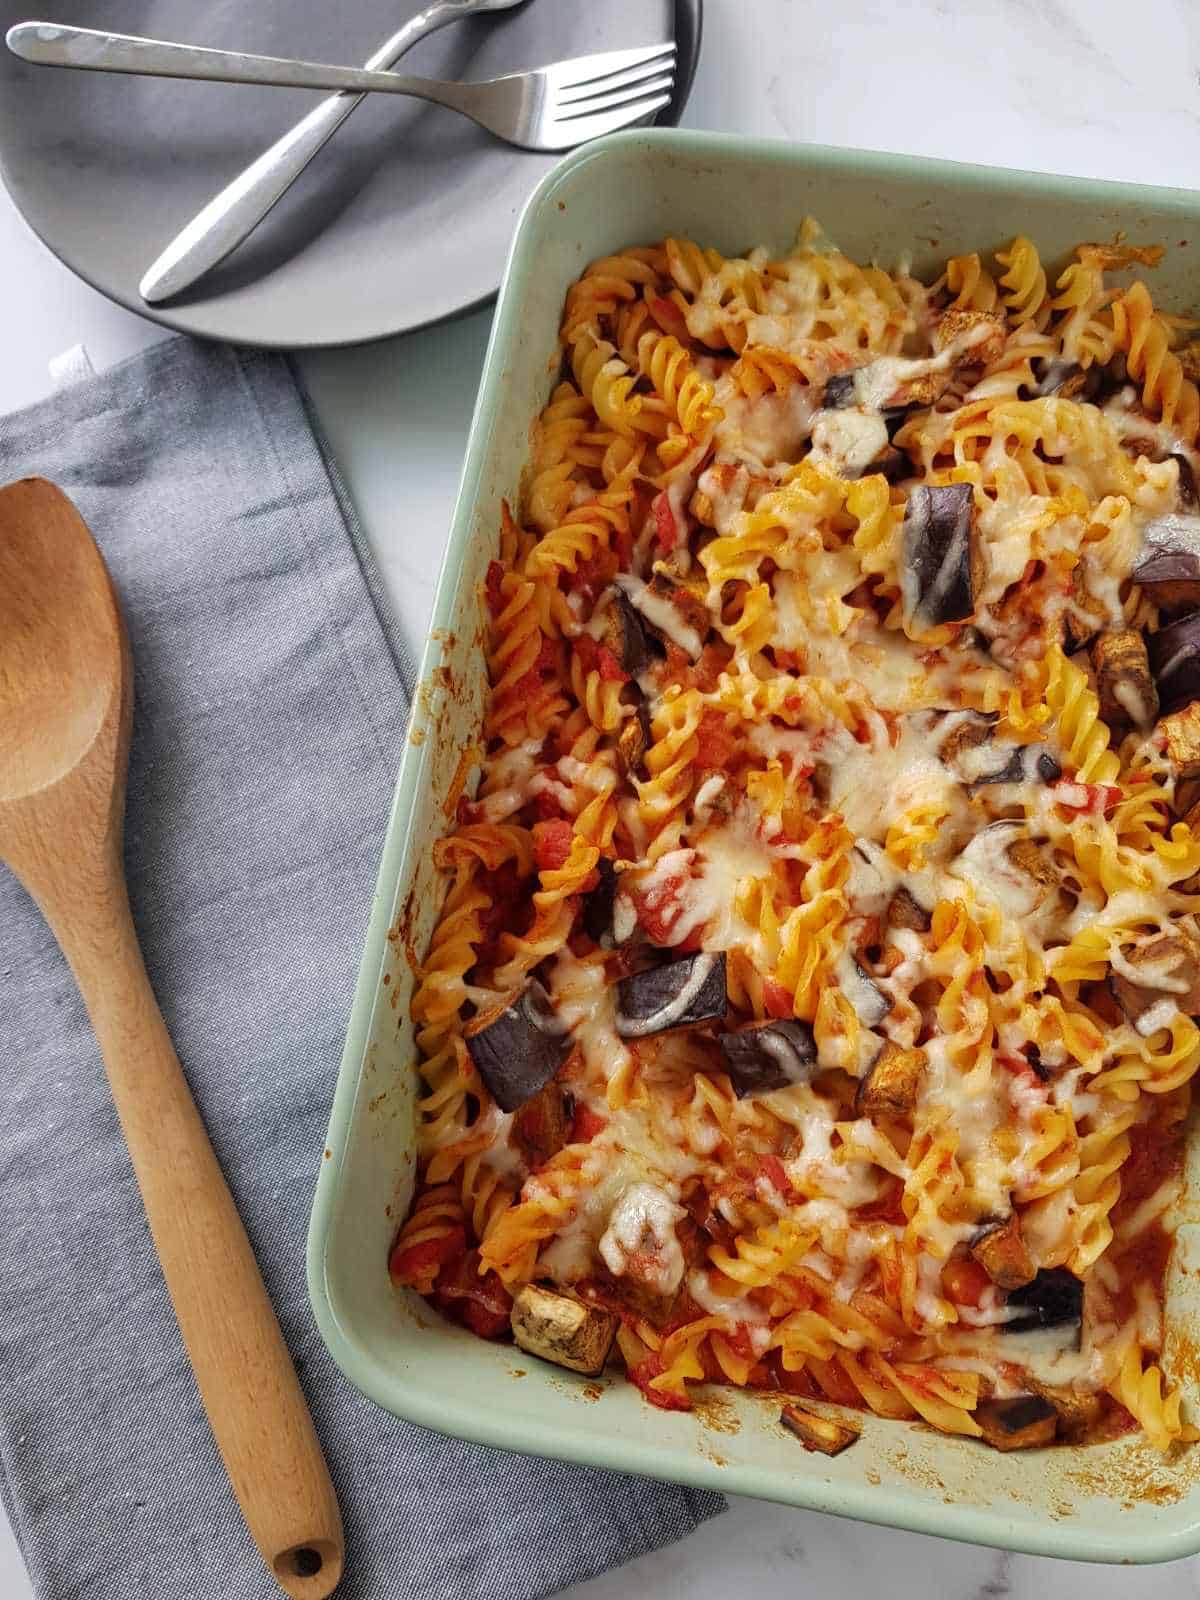 Eggplant and mozzarella pasta bake in a baking dish next to a plate with cutlery, a tea towel and a wooden serving spoon.